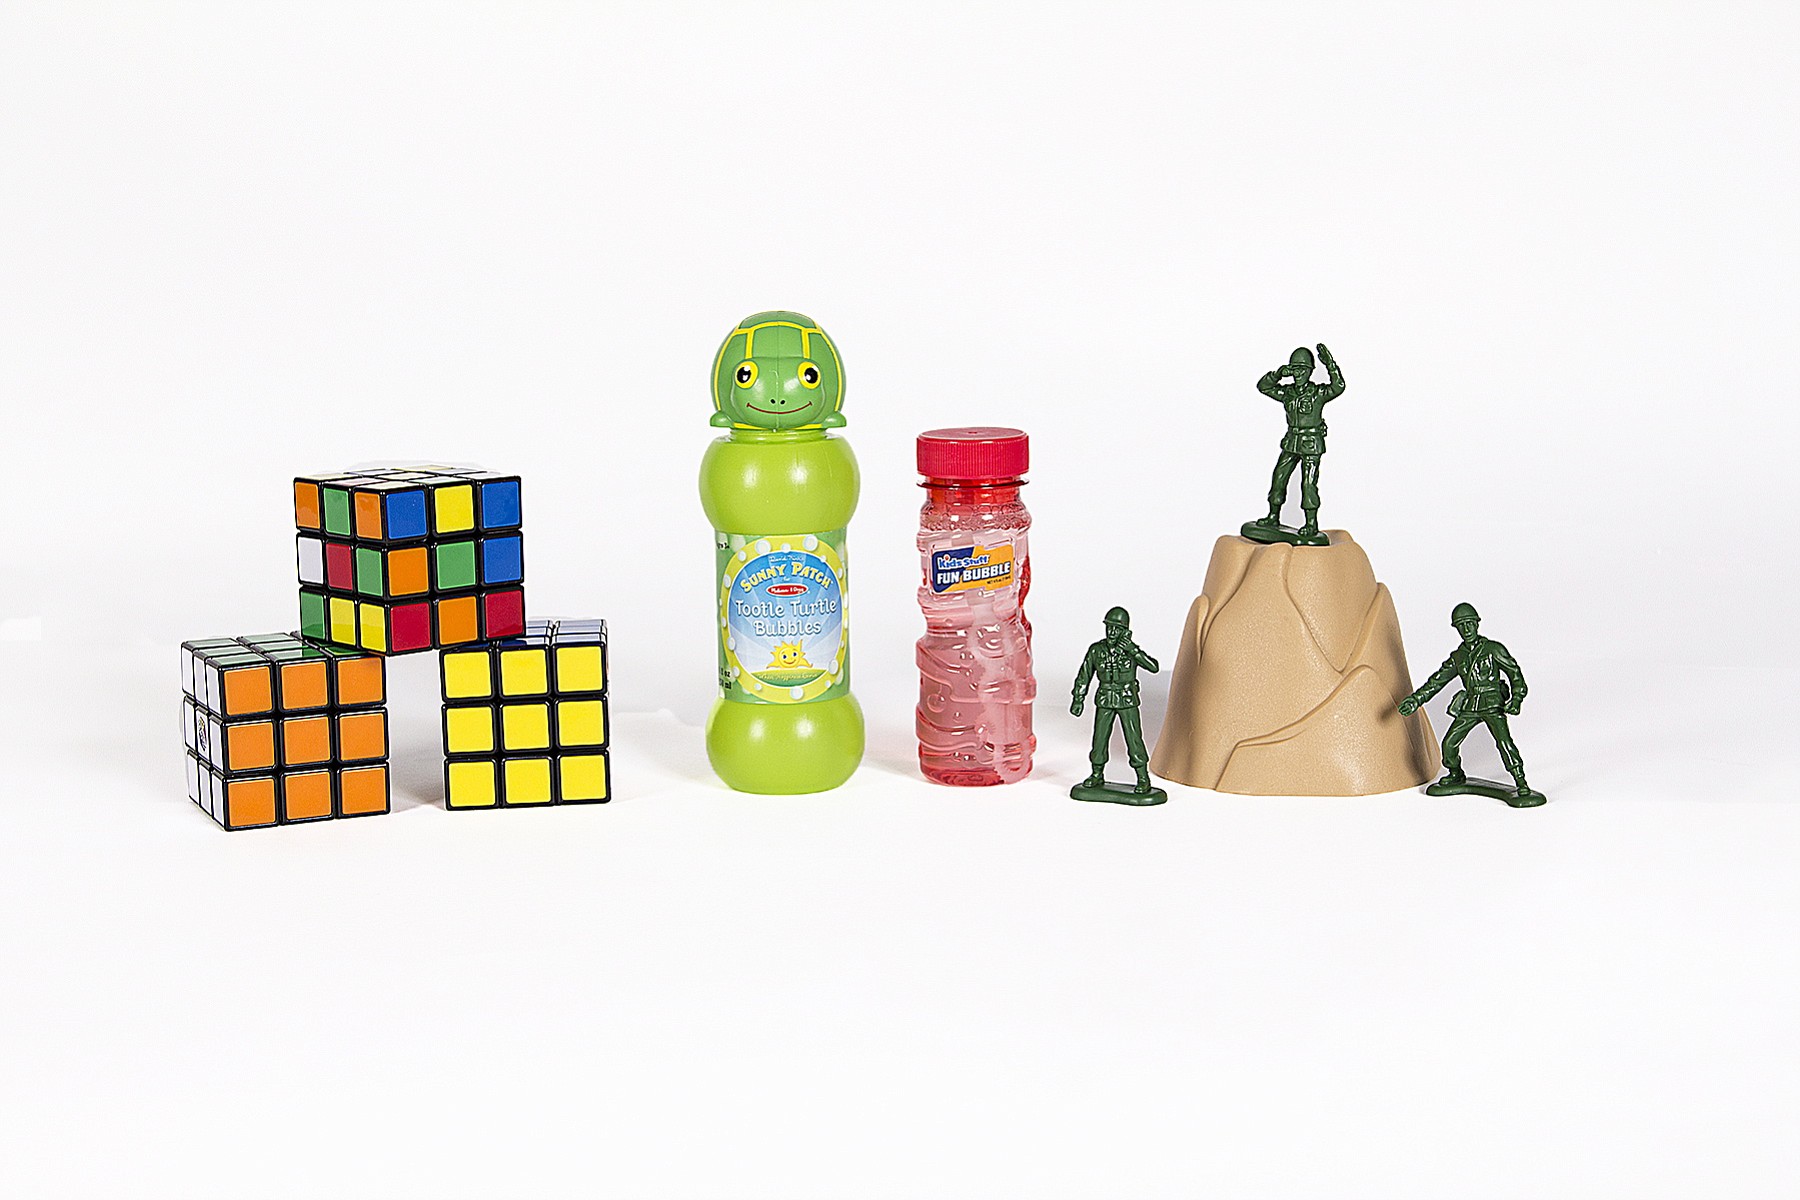 Little green army men, along with the Rubik's Cube and bubbles, were announced Thursday as the newest additions to the National Toy Hall of Fame in Rochester, N.Y.